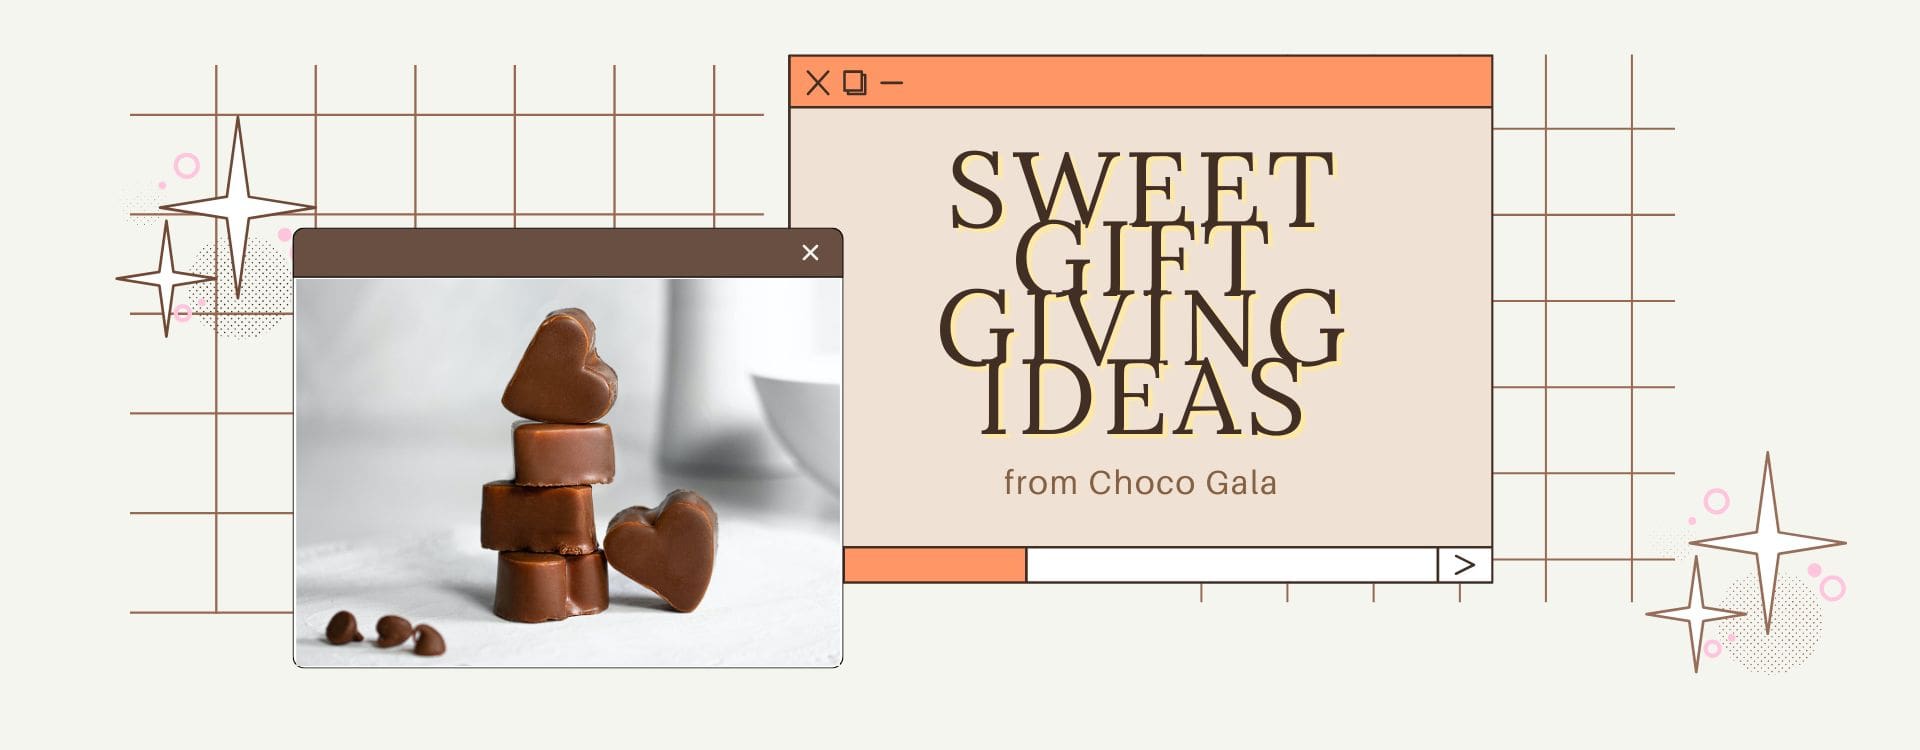 Welcome to our Gift Giving Ideas Series. We will present various ideas on how Choco Gala helps you celebrate sweetly! Whether for a festive celebration or for a special someone, our handcrafted Belgian couverture  chocolates are sure to impress and amaze!